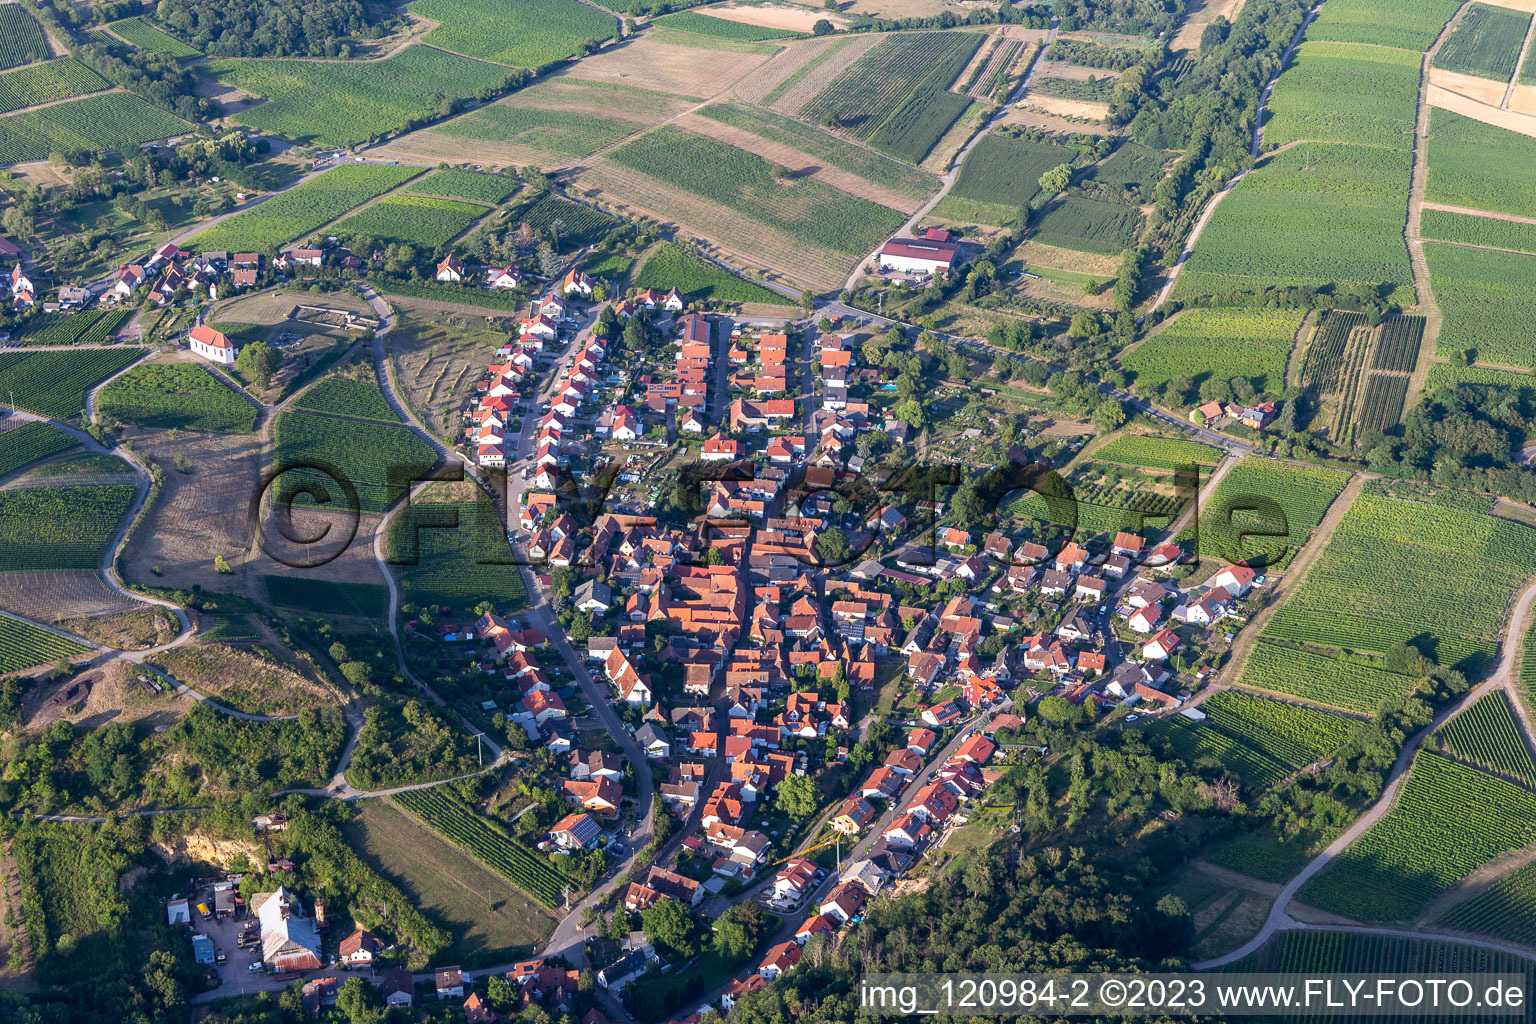 Drone image of District Gleishorbach in Gleiszellen-Gleishorbach in the state Rhineland-Palatinate, Germany